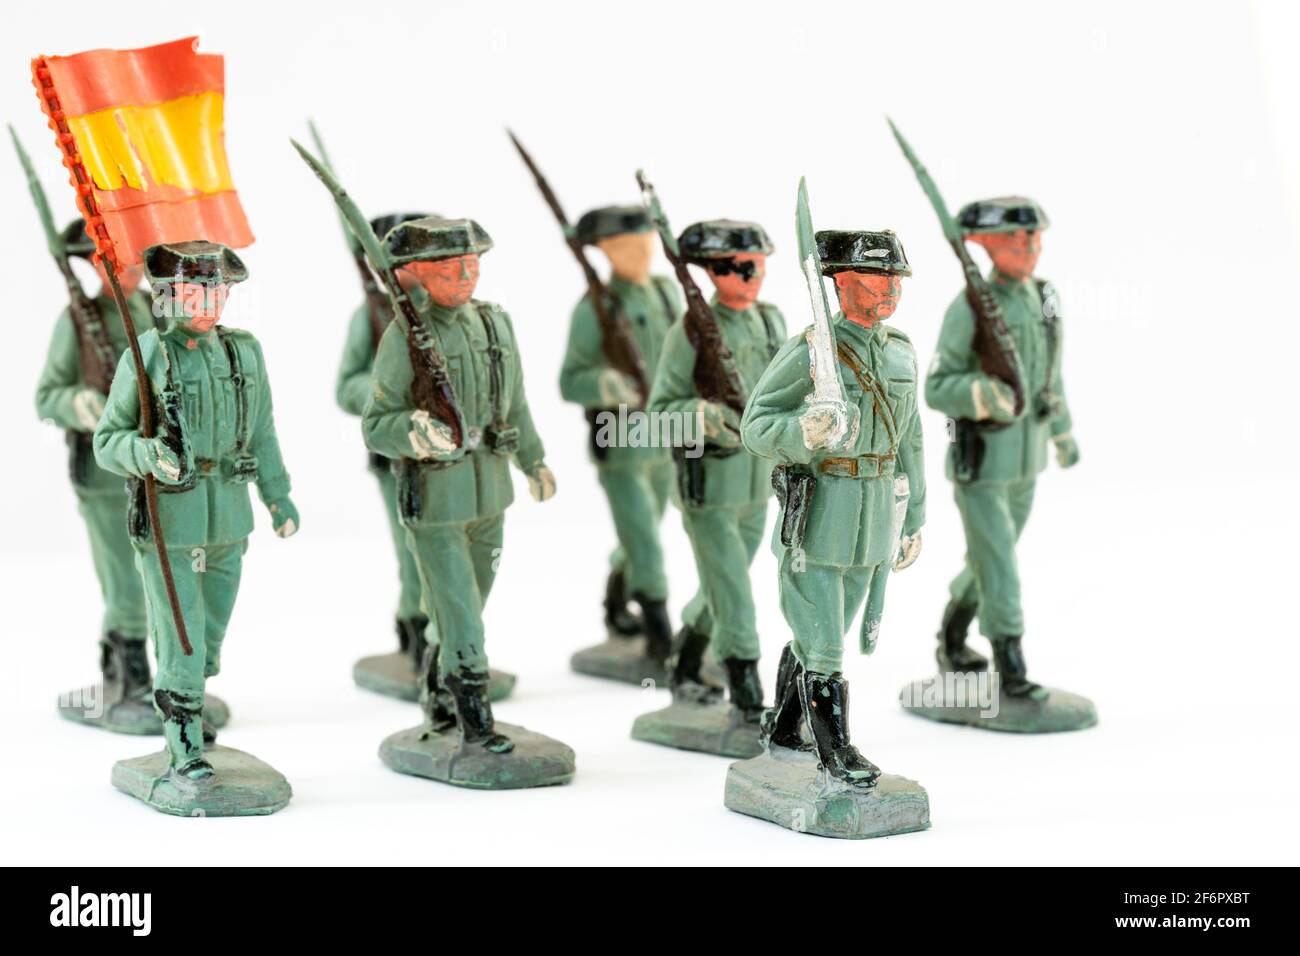 Reamsa Spanish Guardia Civil, Civil Guard plastic toy figures. Several marching with office at the front shouldering a sword, and flag bearer behind. Stock Photo